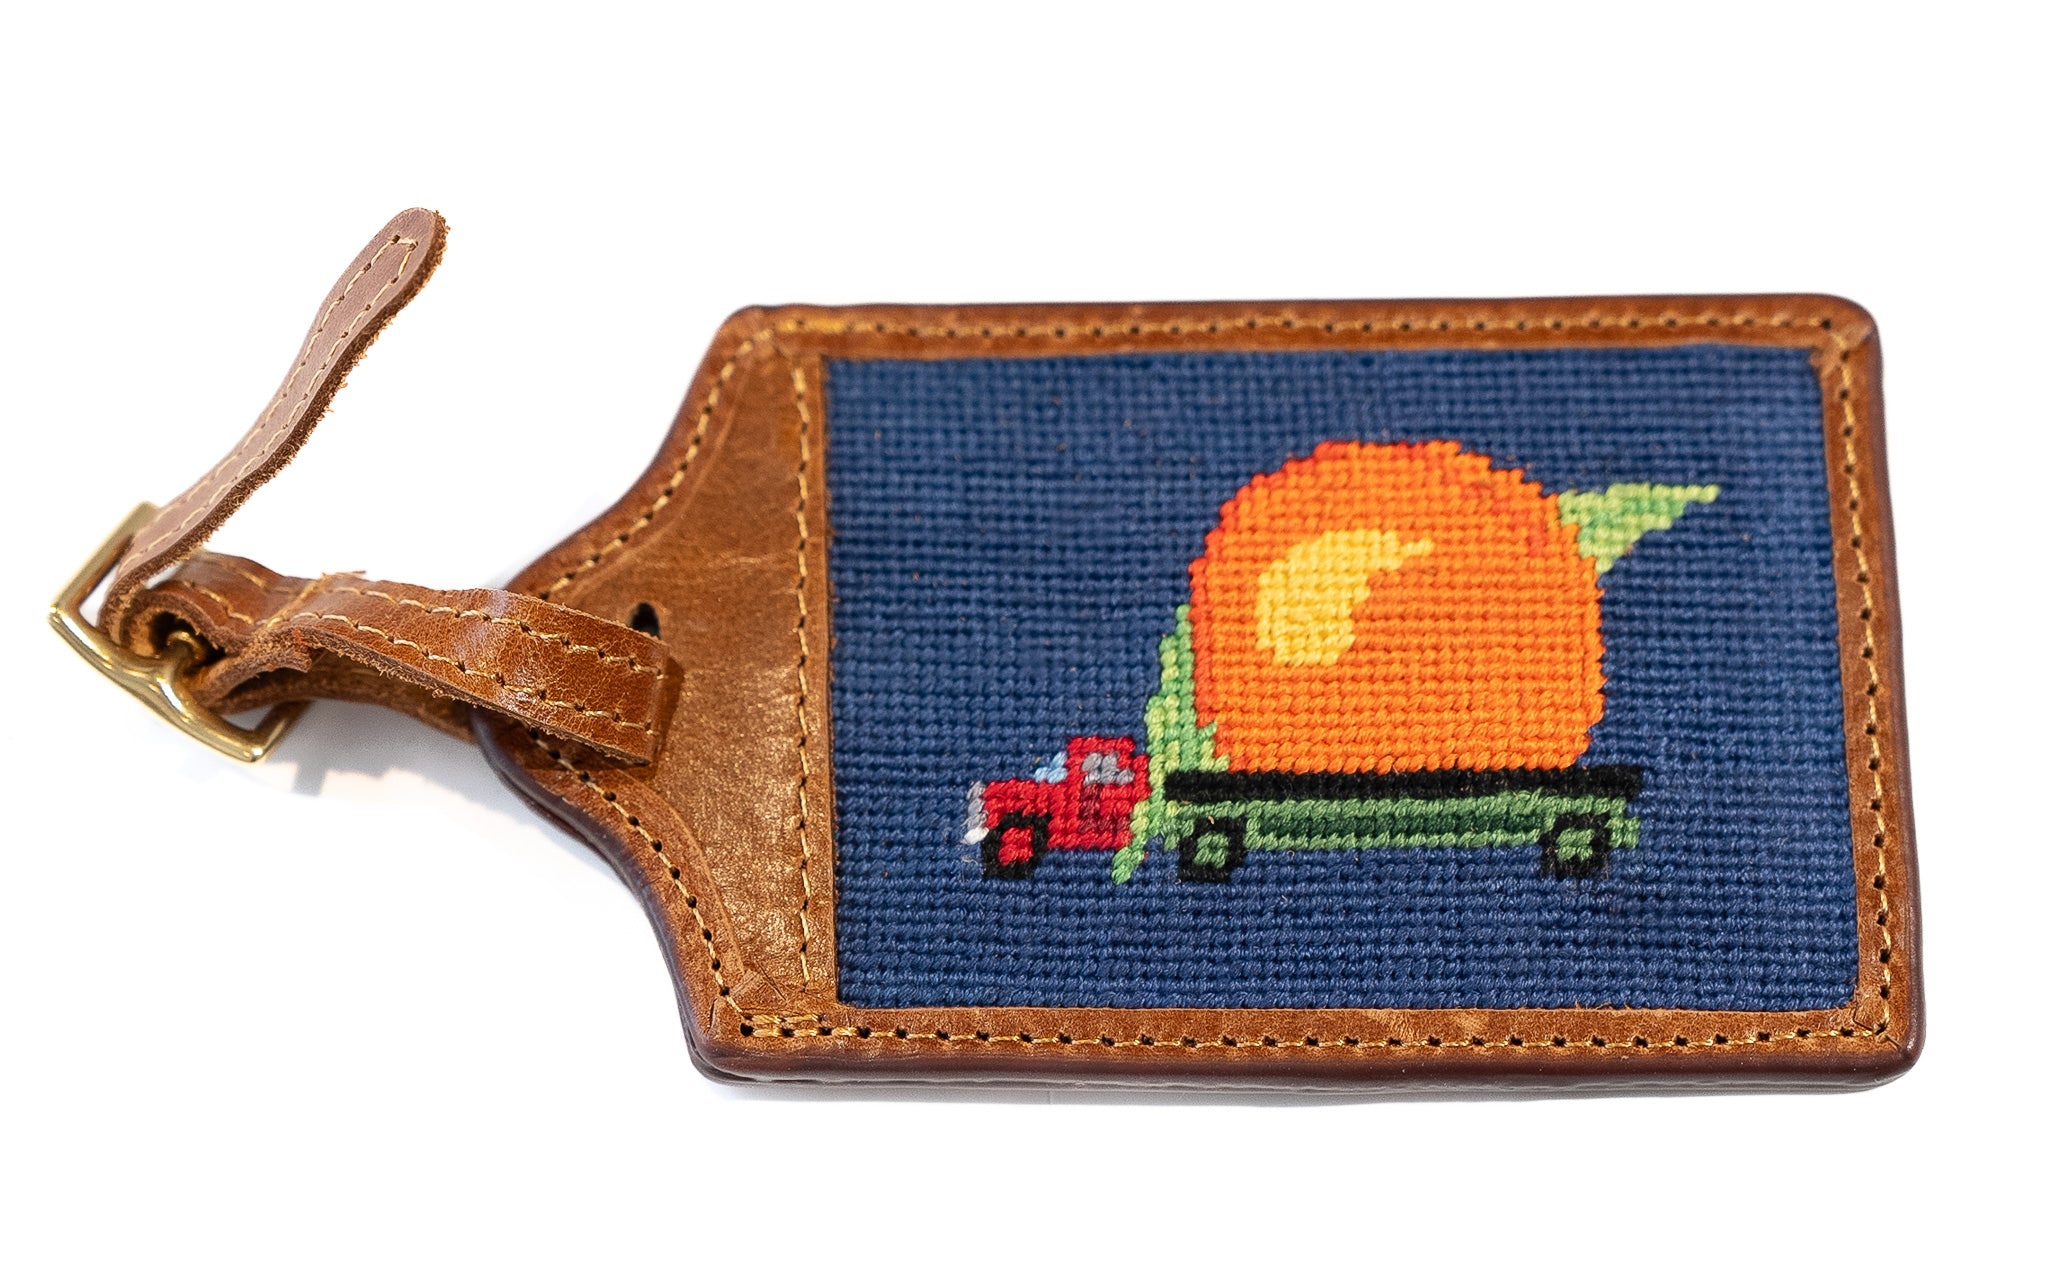 Smathers & Branson Eat a peach Needlepoint Luggage Tag